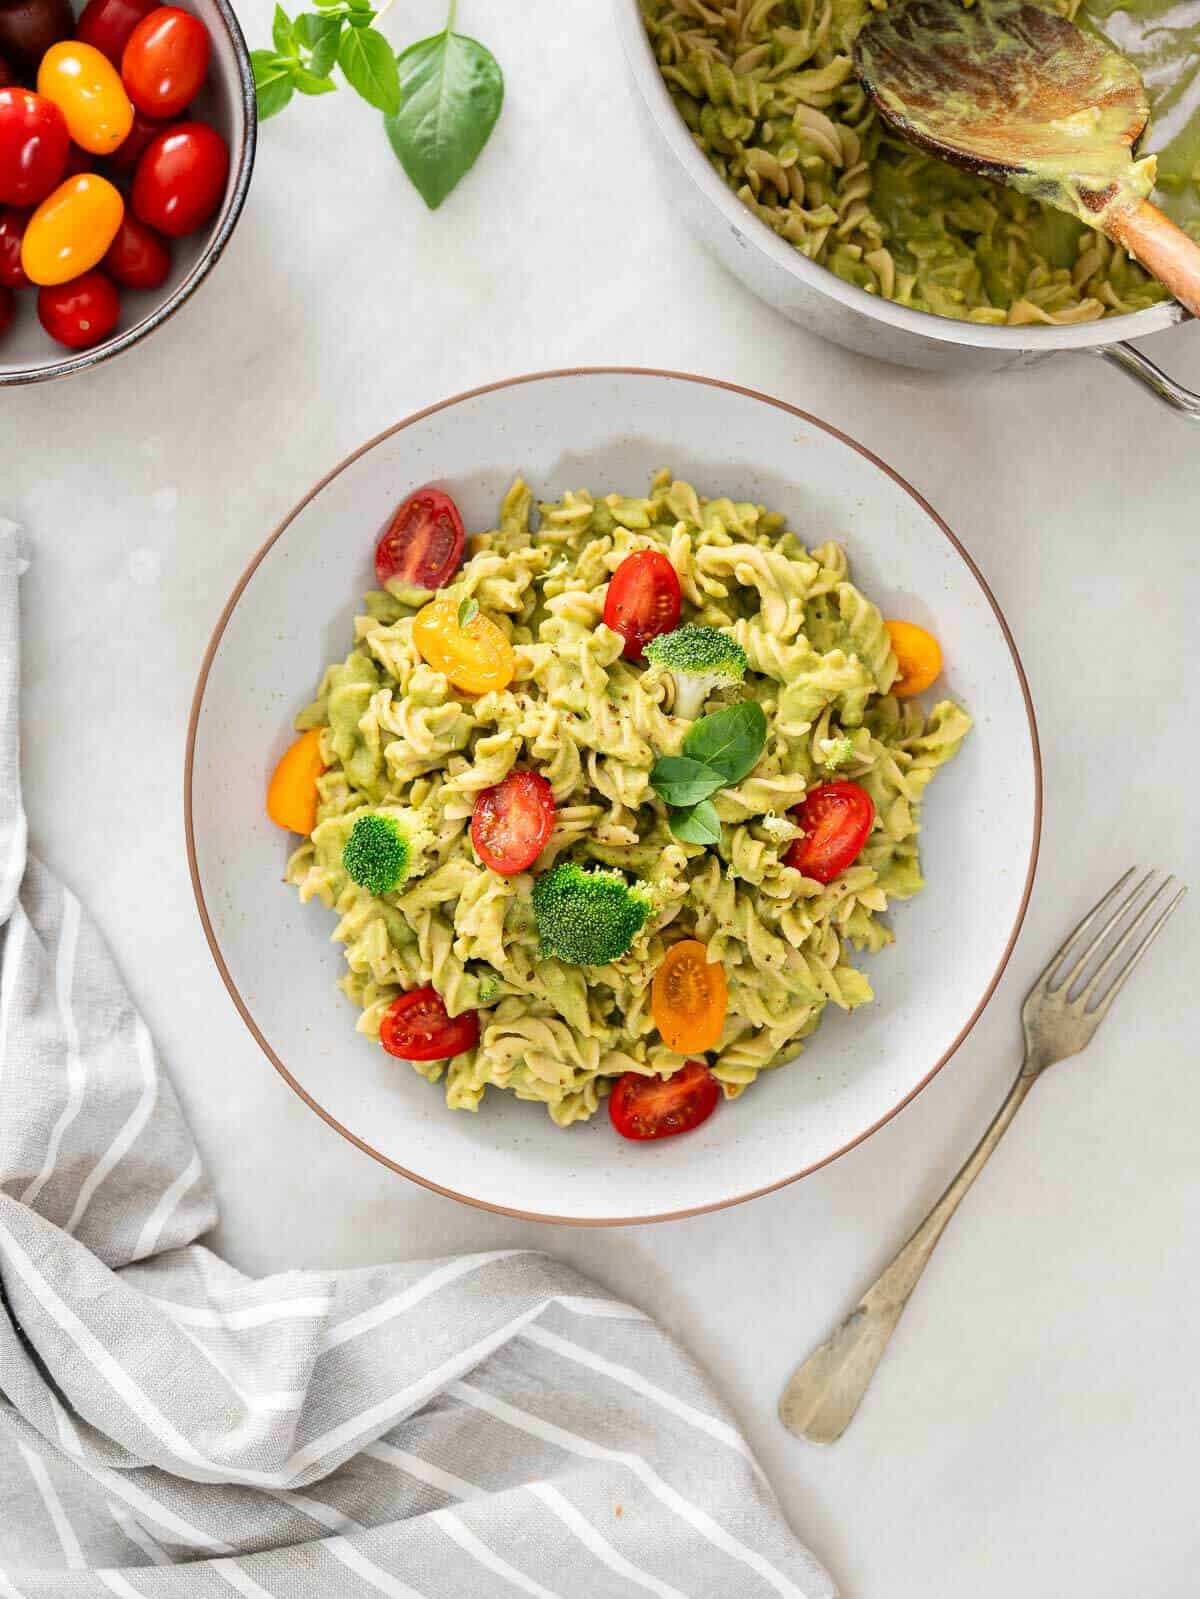 bowl of green high-protein healthy pasta salad garnished with halved cherry tomatoes, broccoli, and fresh basil leaves, accompanied by a bowl of cherry tomatoes and a kitchen towel